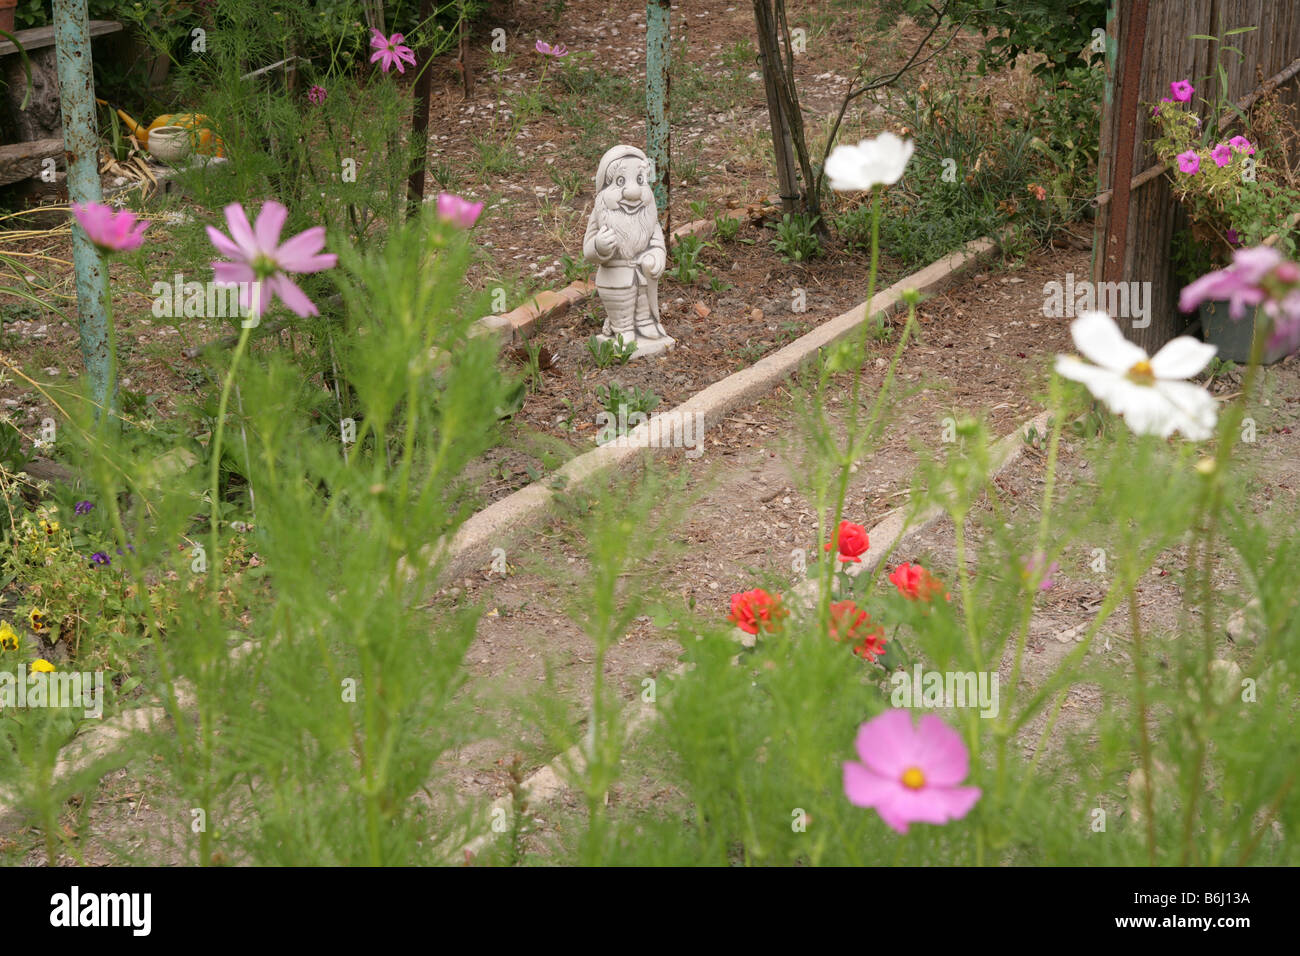 Gnome in garden of flowers, France Stock Photo